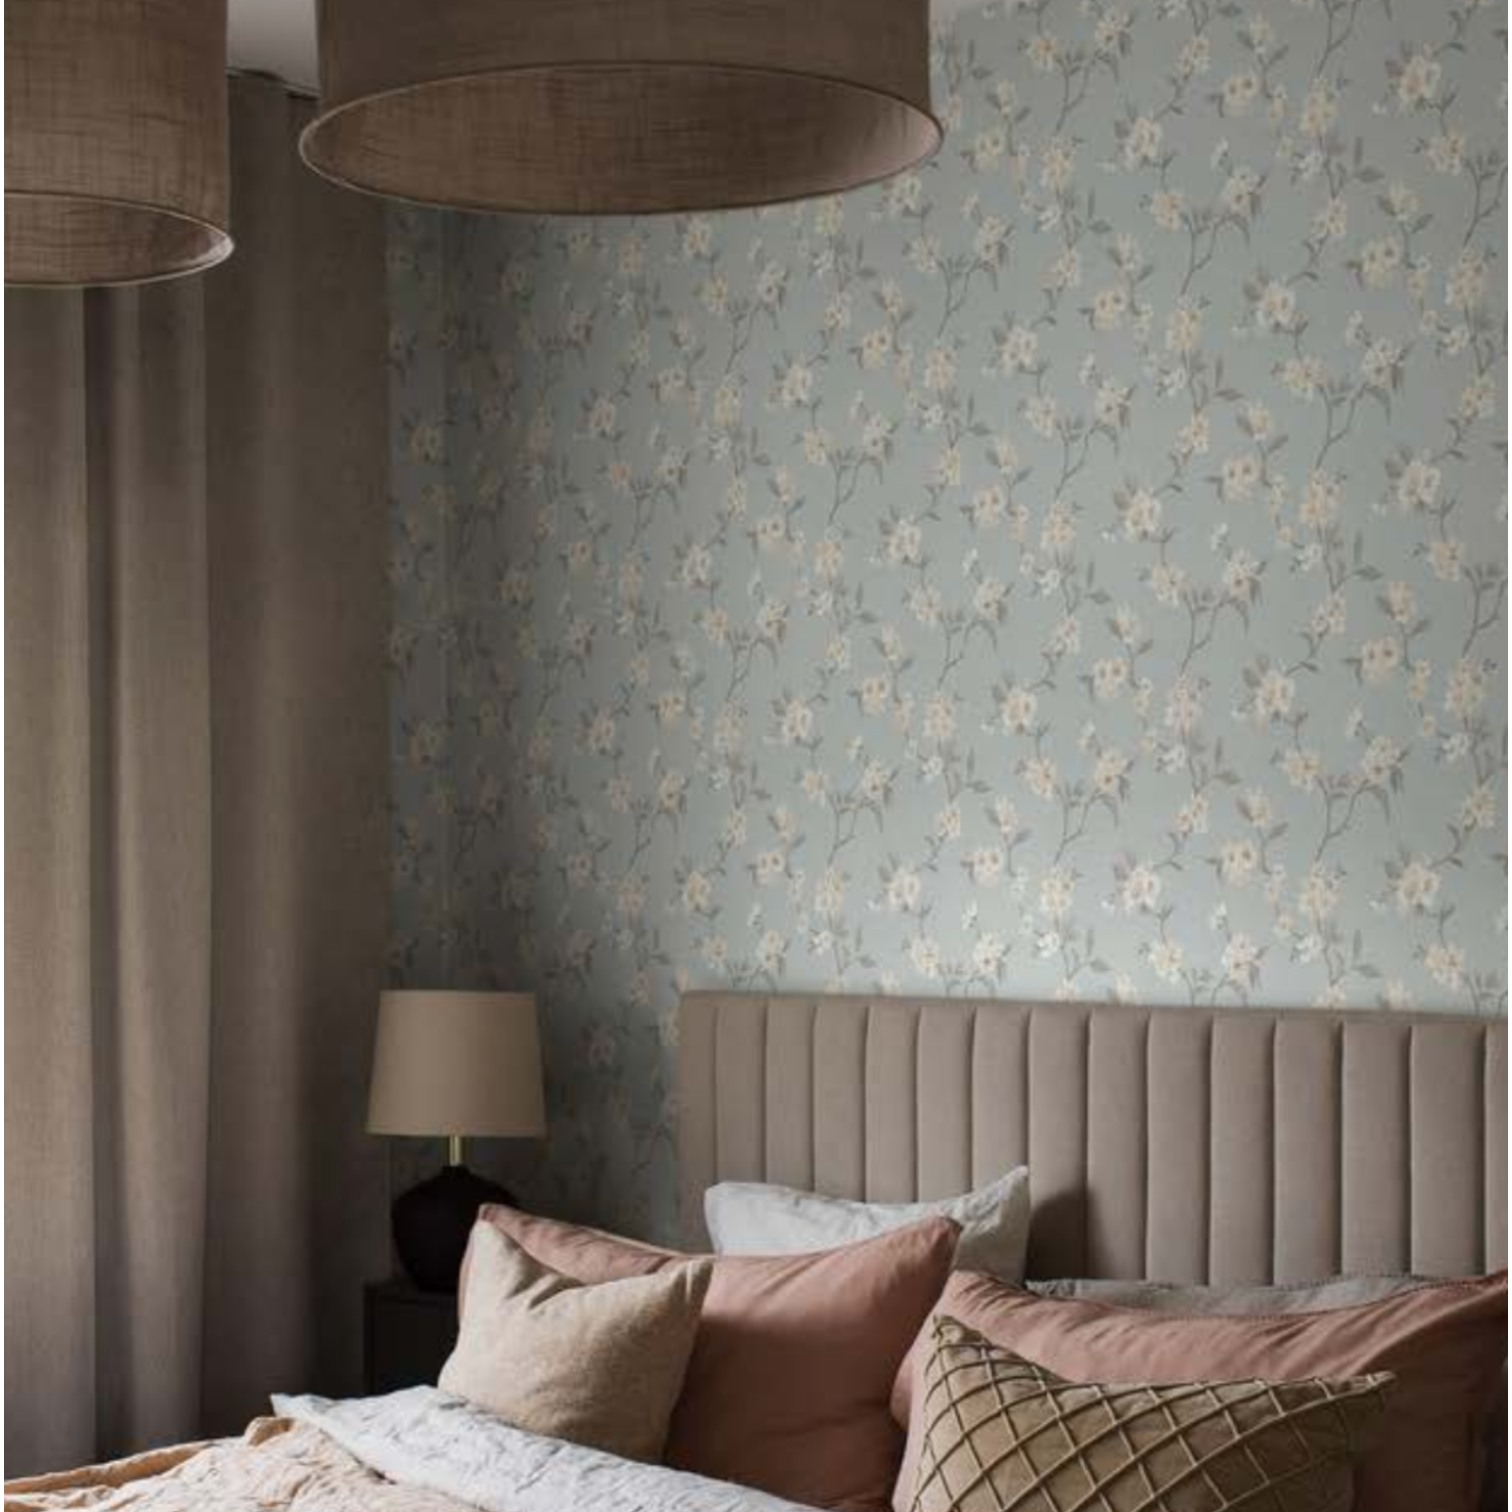 a bed in a a bedroom  where the wall is adorned with a blue floral wallpaper